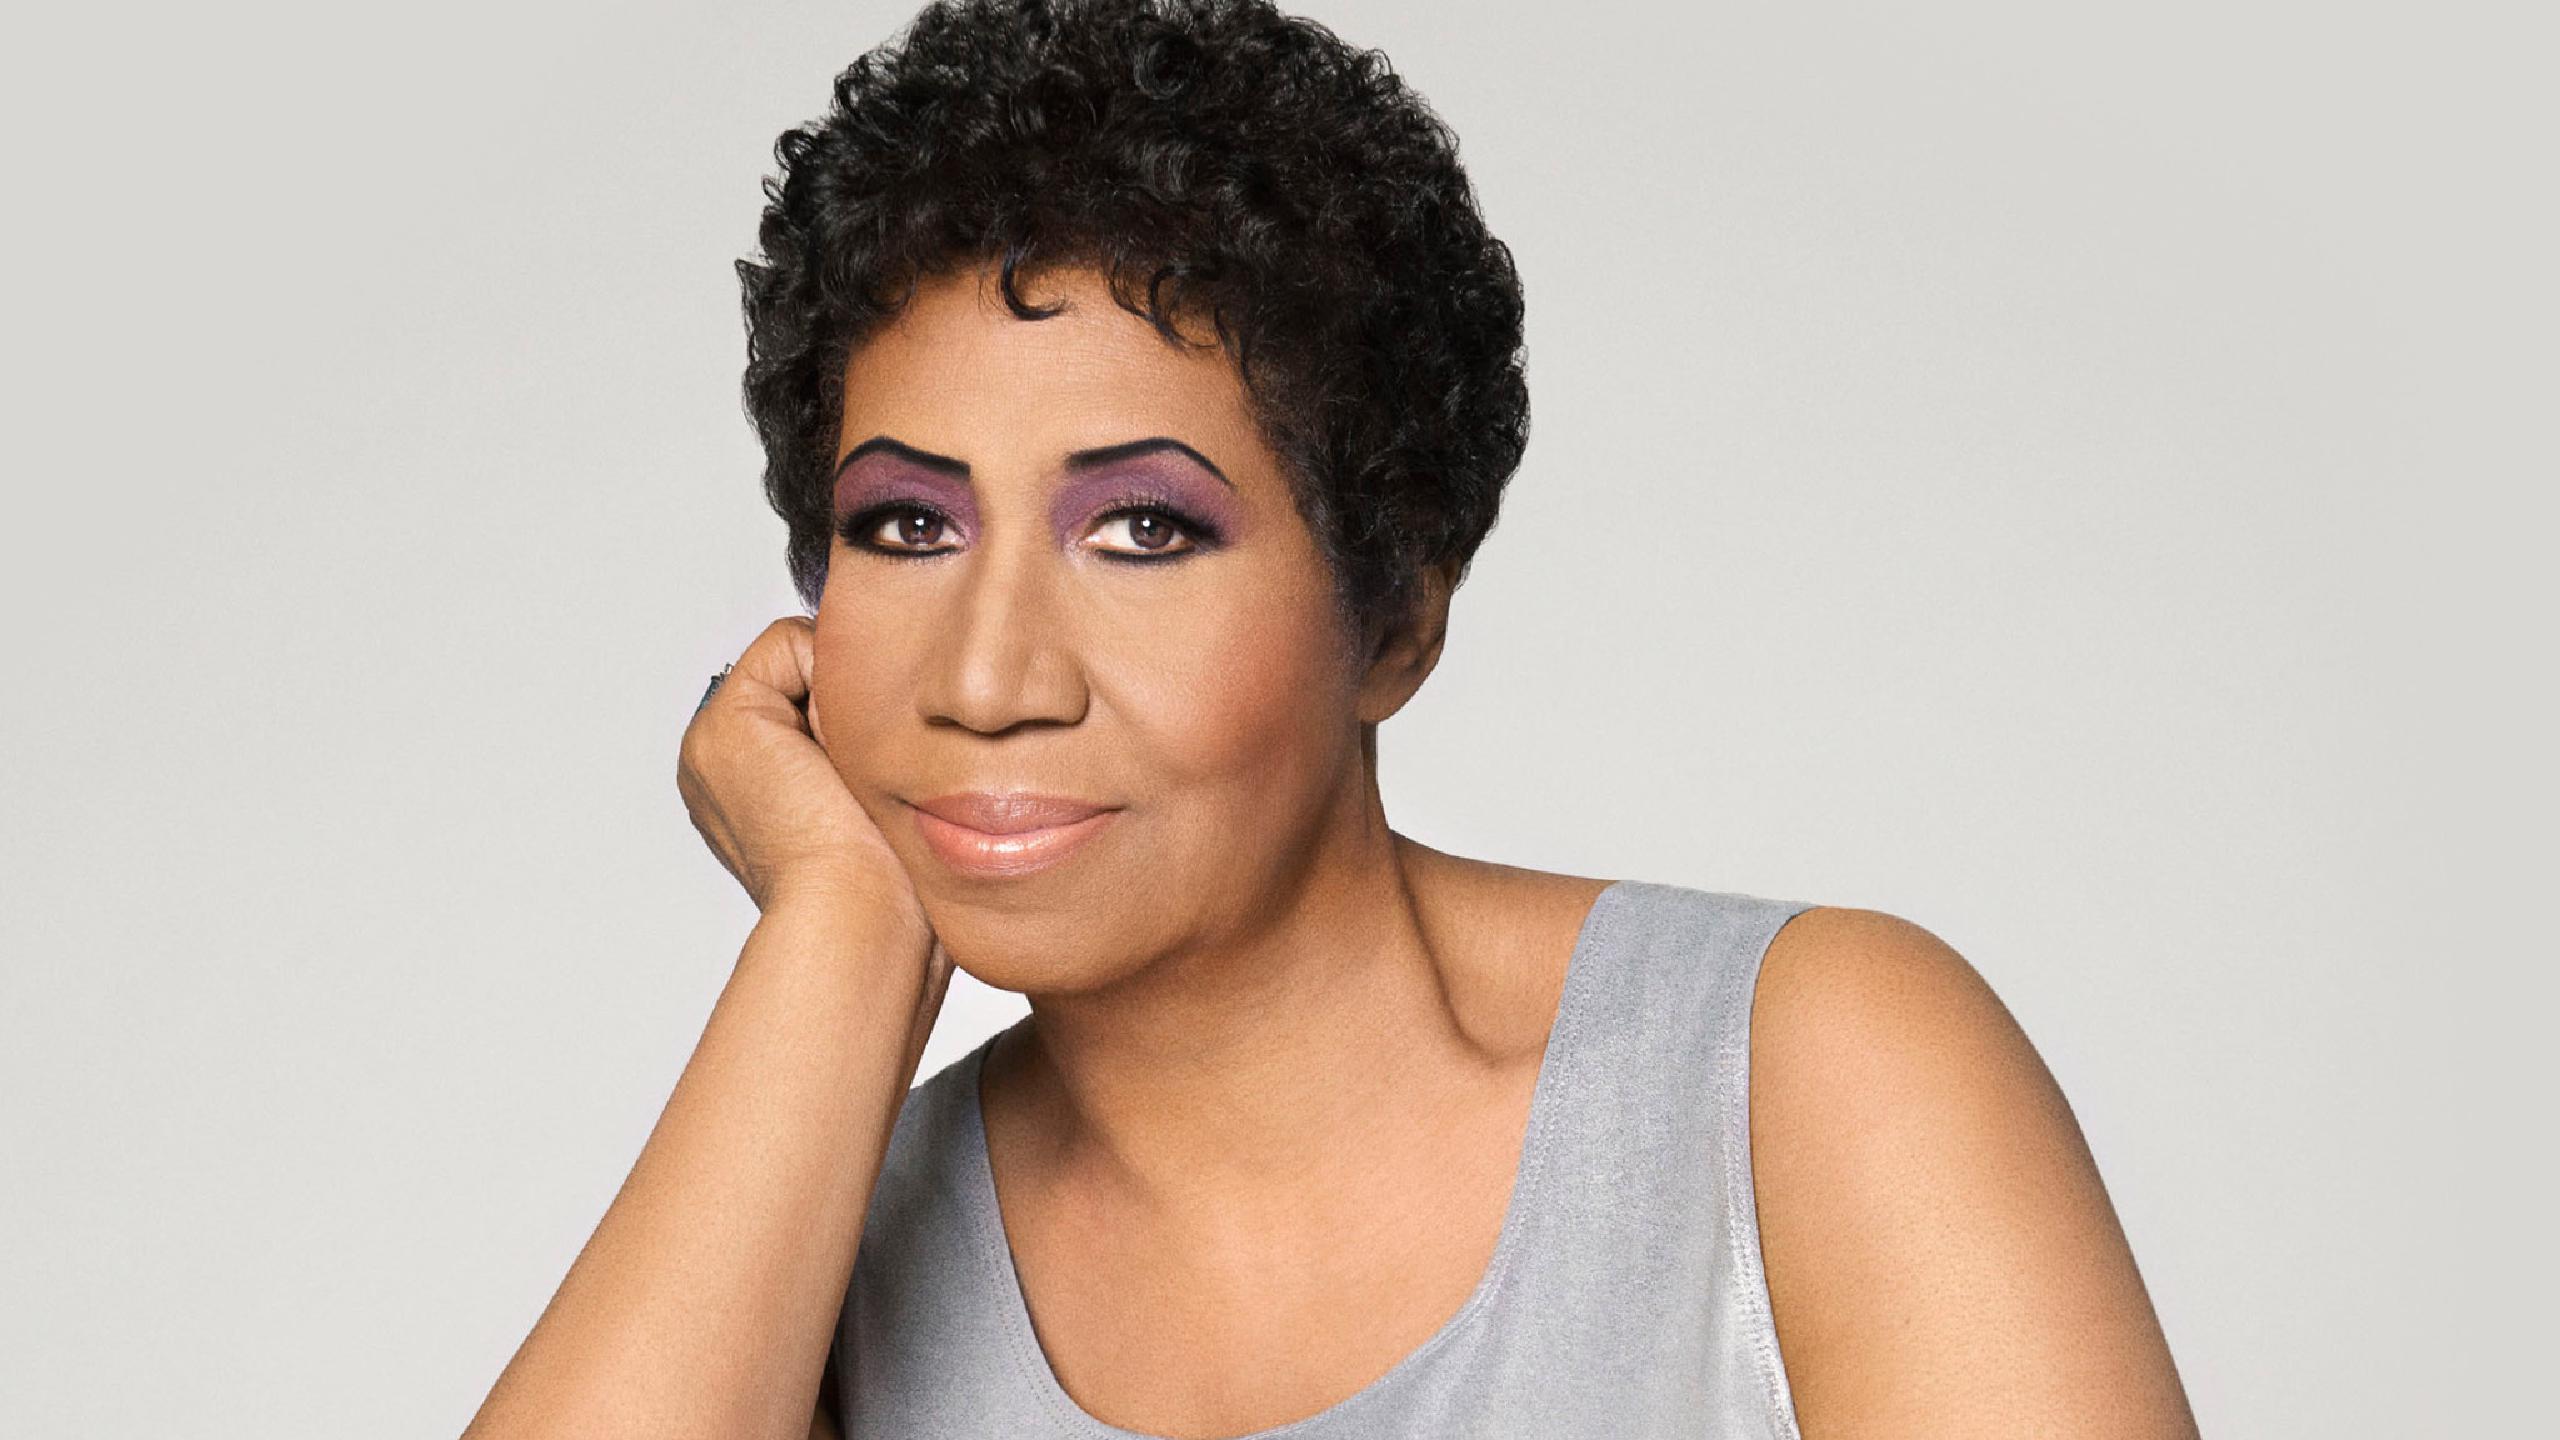 Aretha Franklin tour dates 2022 2023. Aretha Franklin tickets and